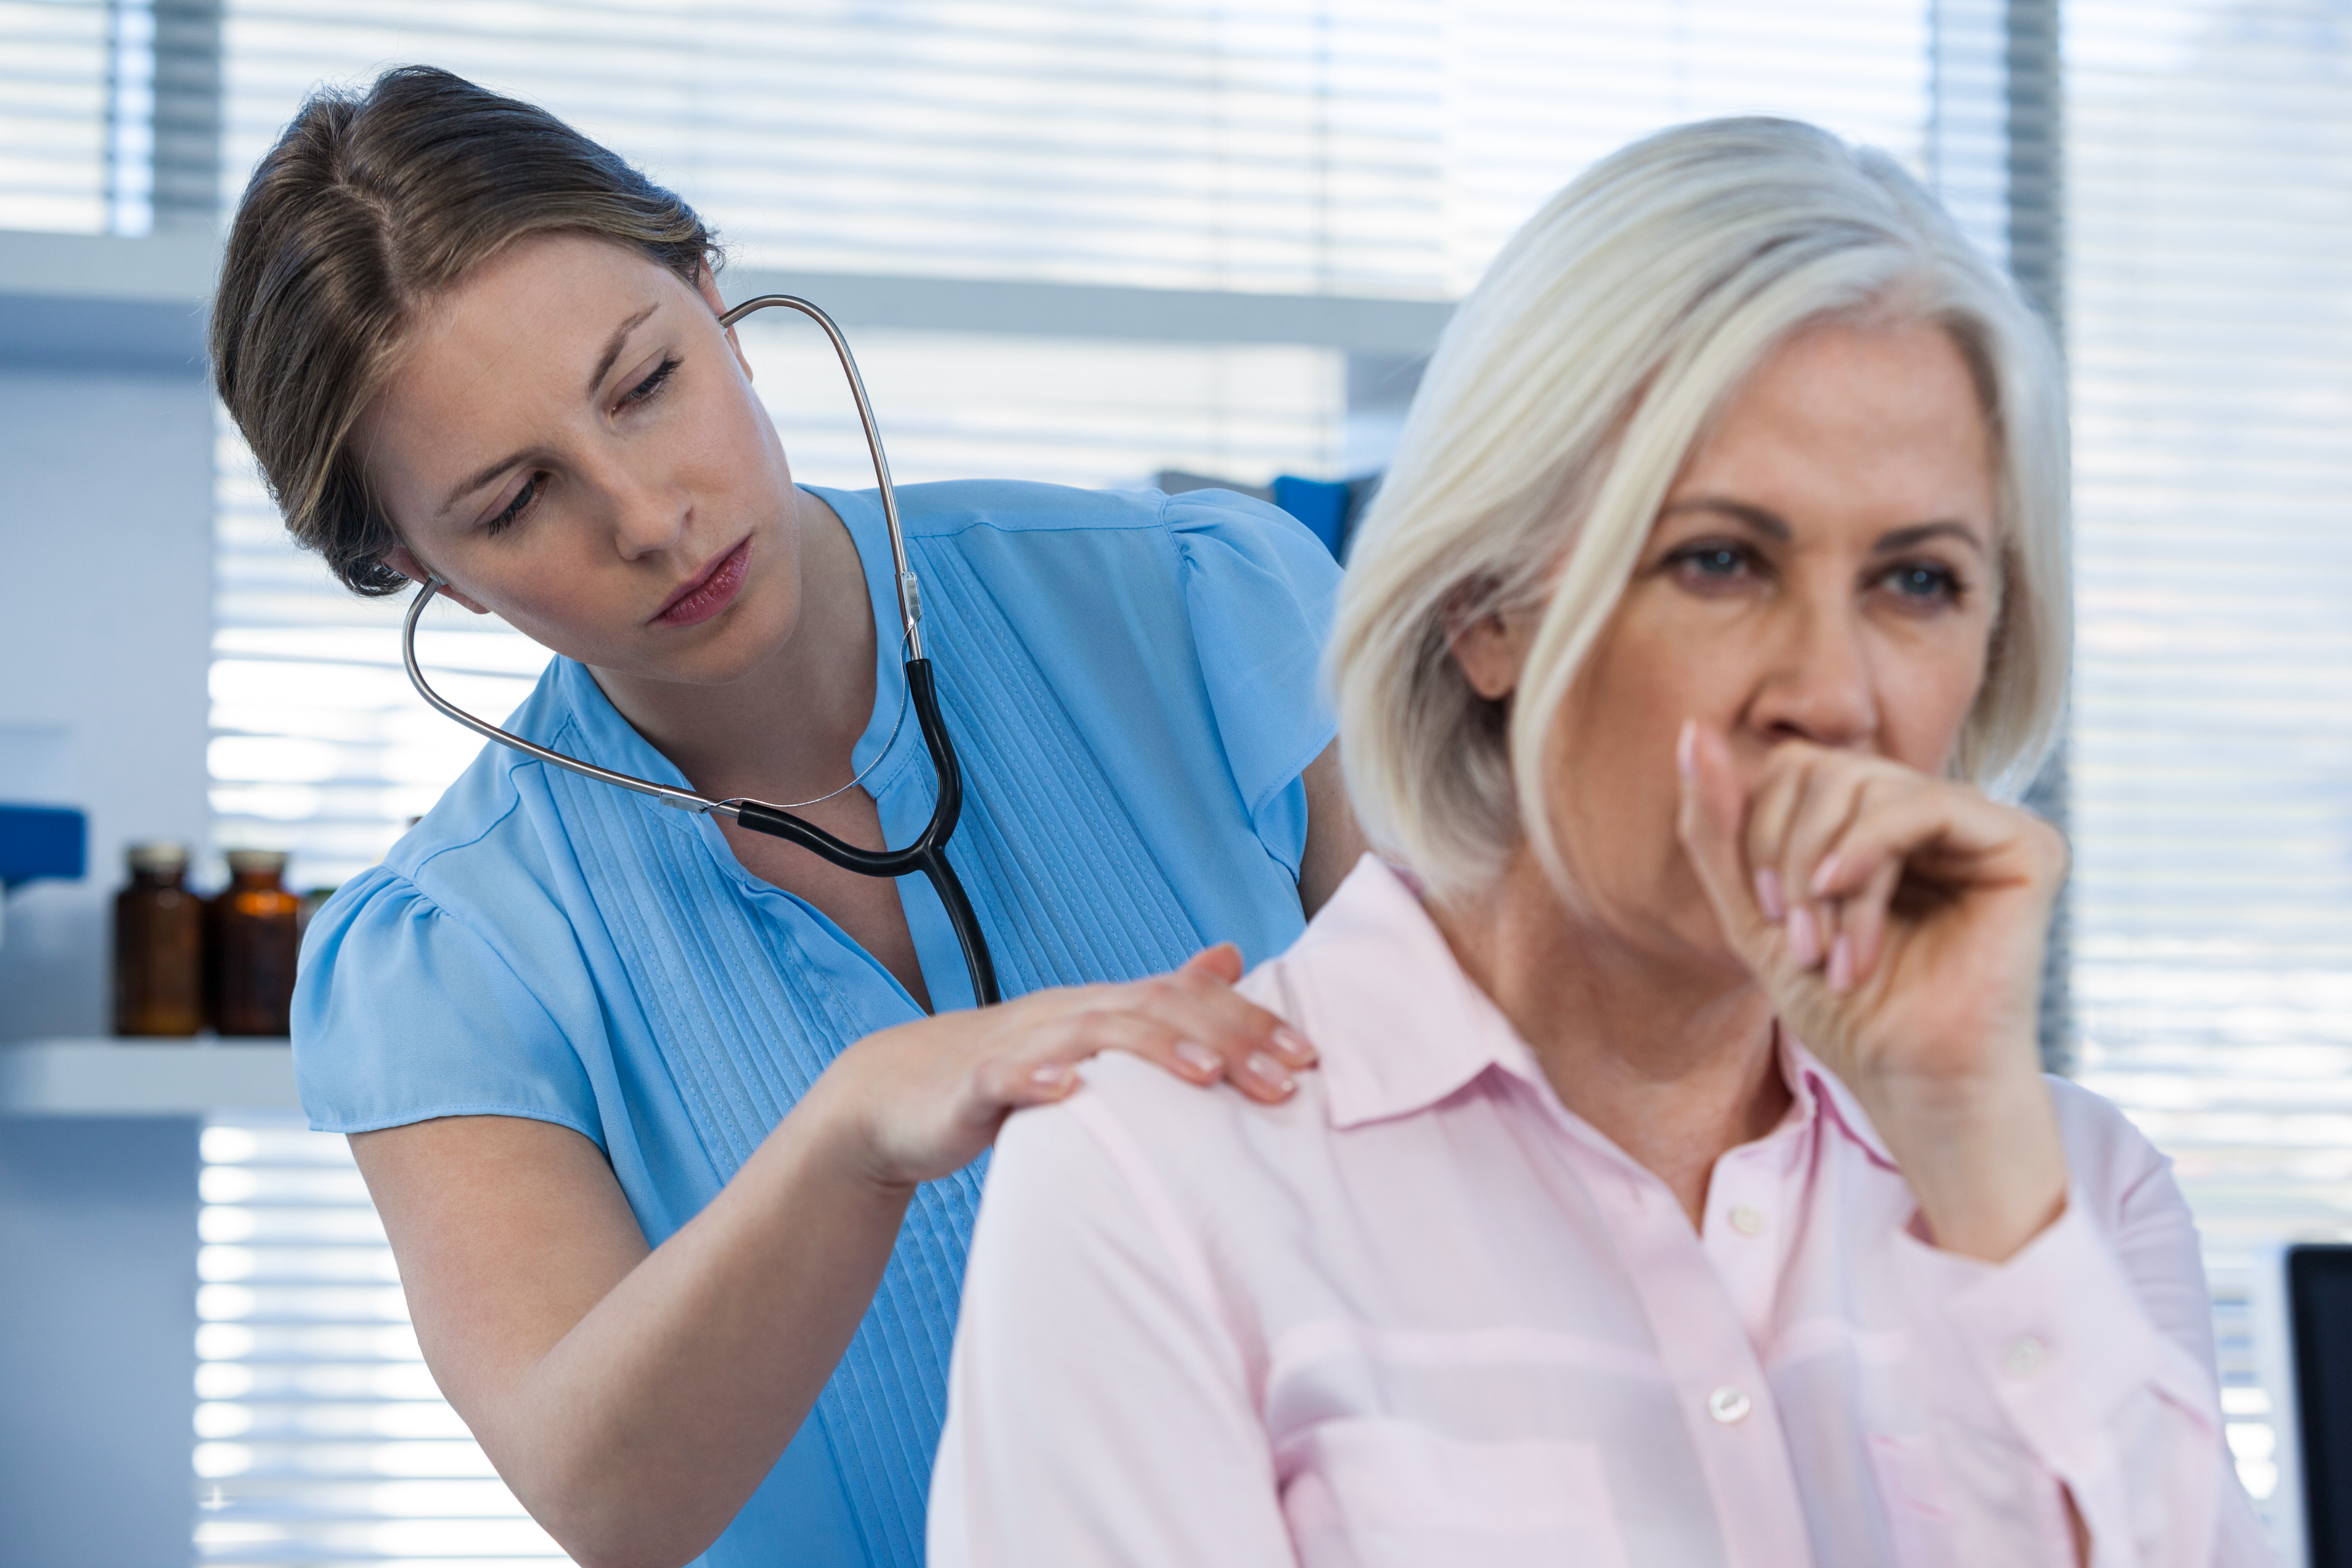 An image of a doctor examining a patient who has trouble swallowing.